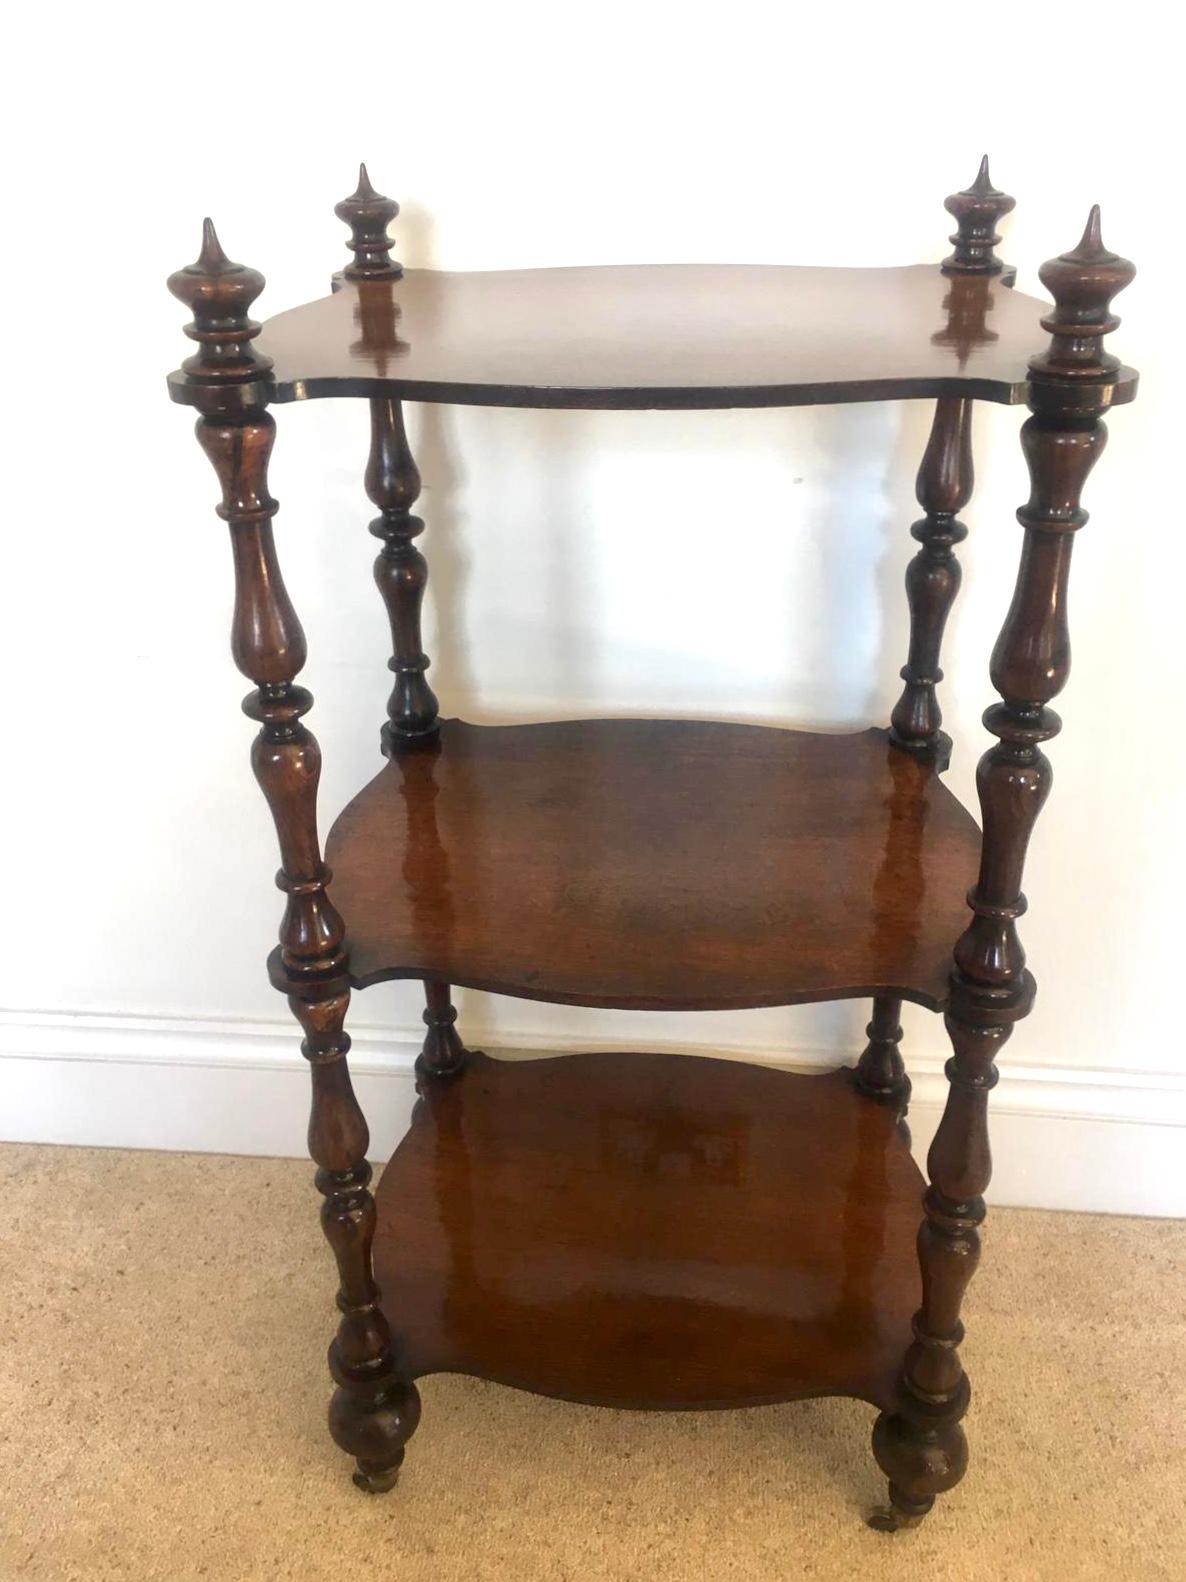 19th Century Antique Victorian Freestanding Rosewood Whatnot